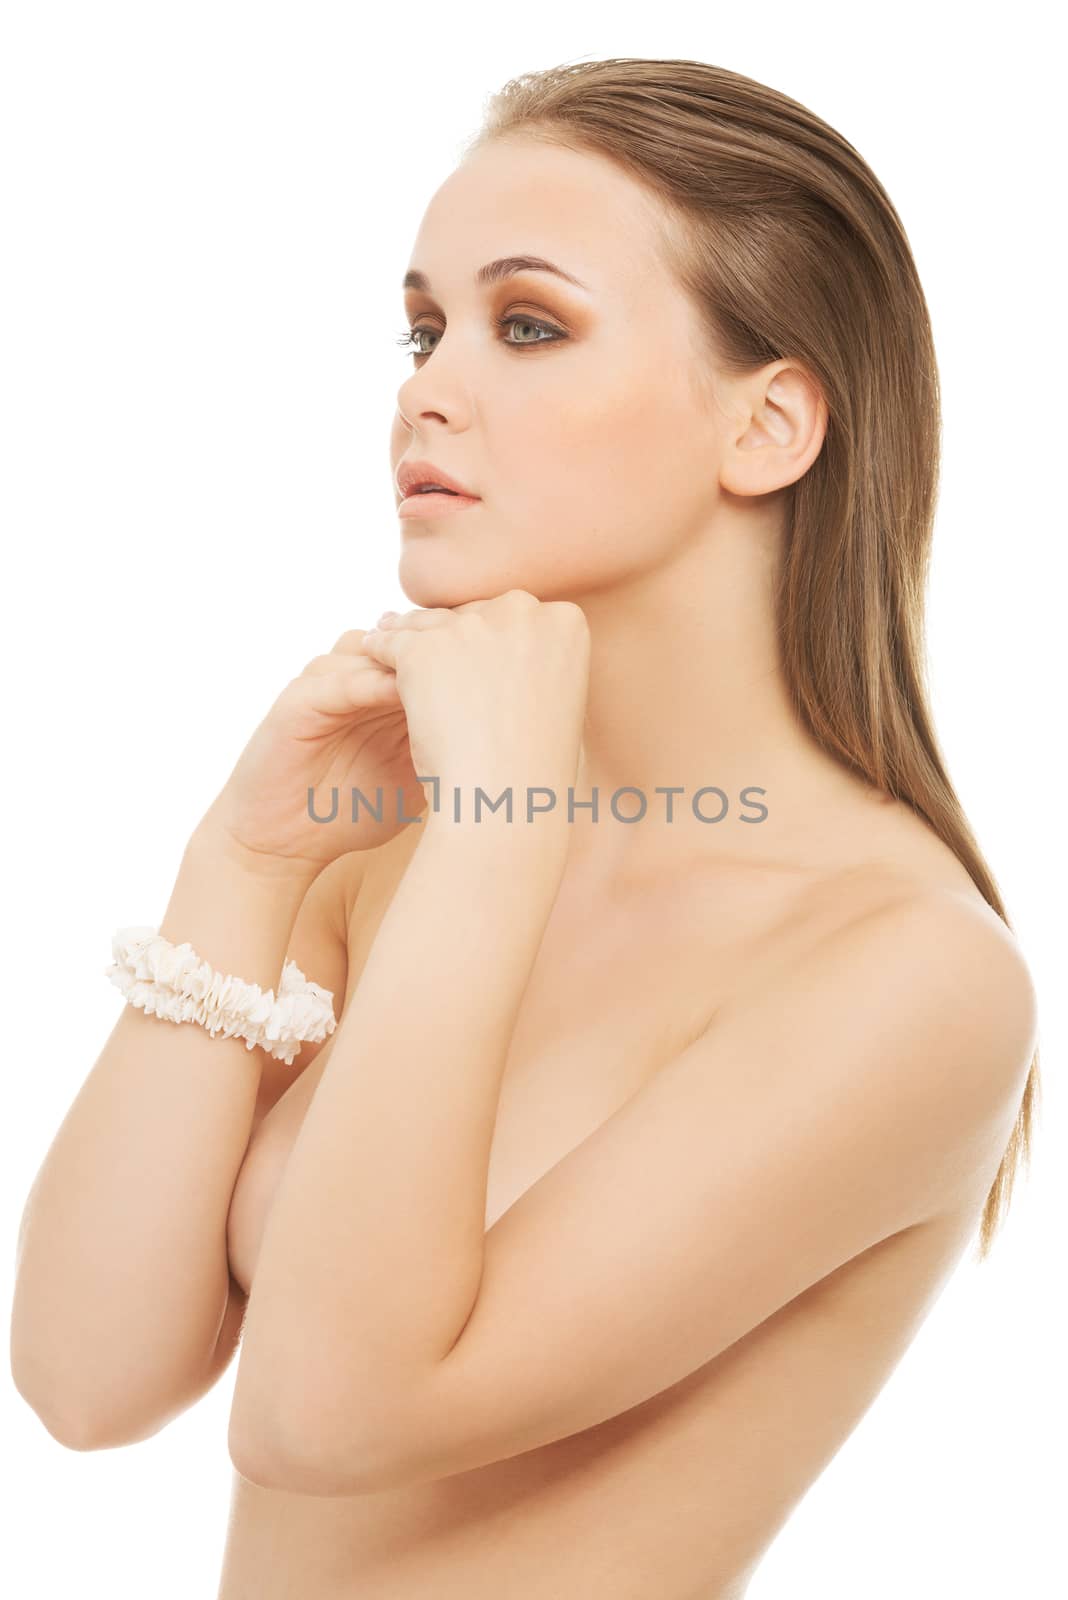 Attractive naked woman with hands close to face. by BDS